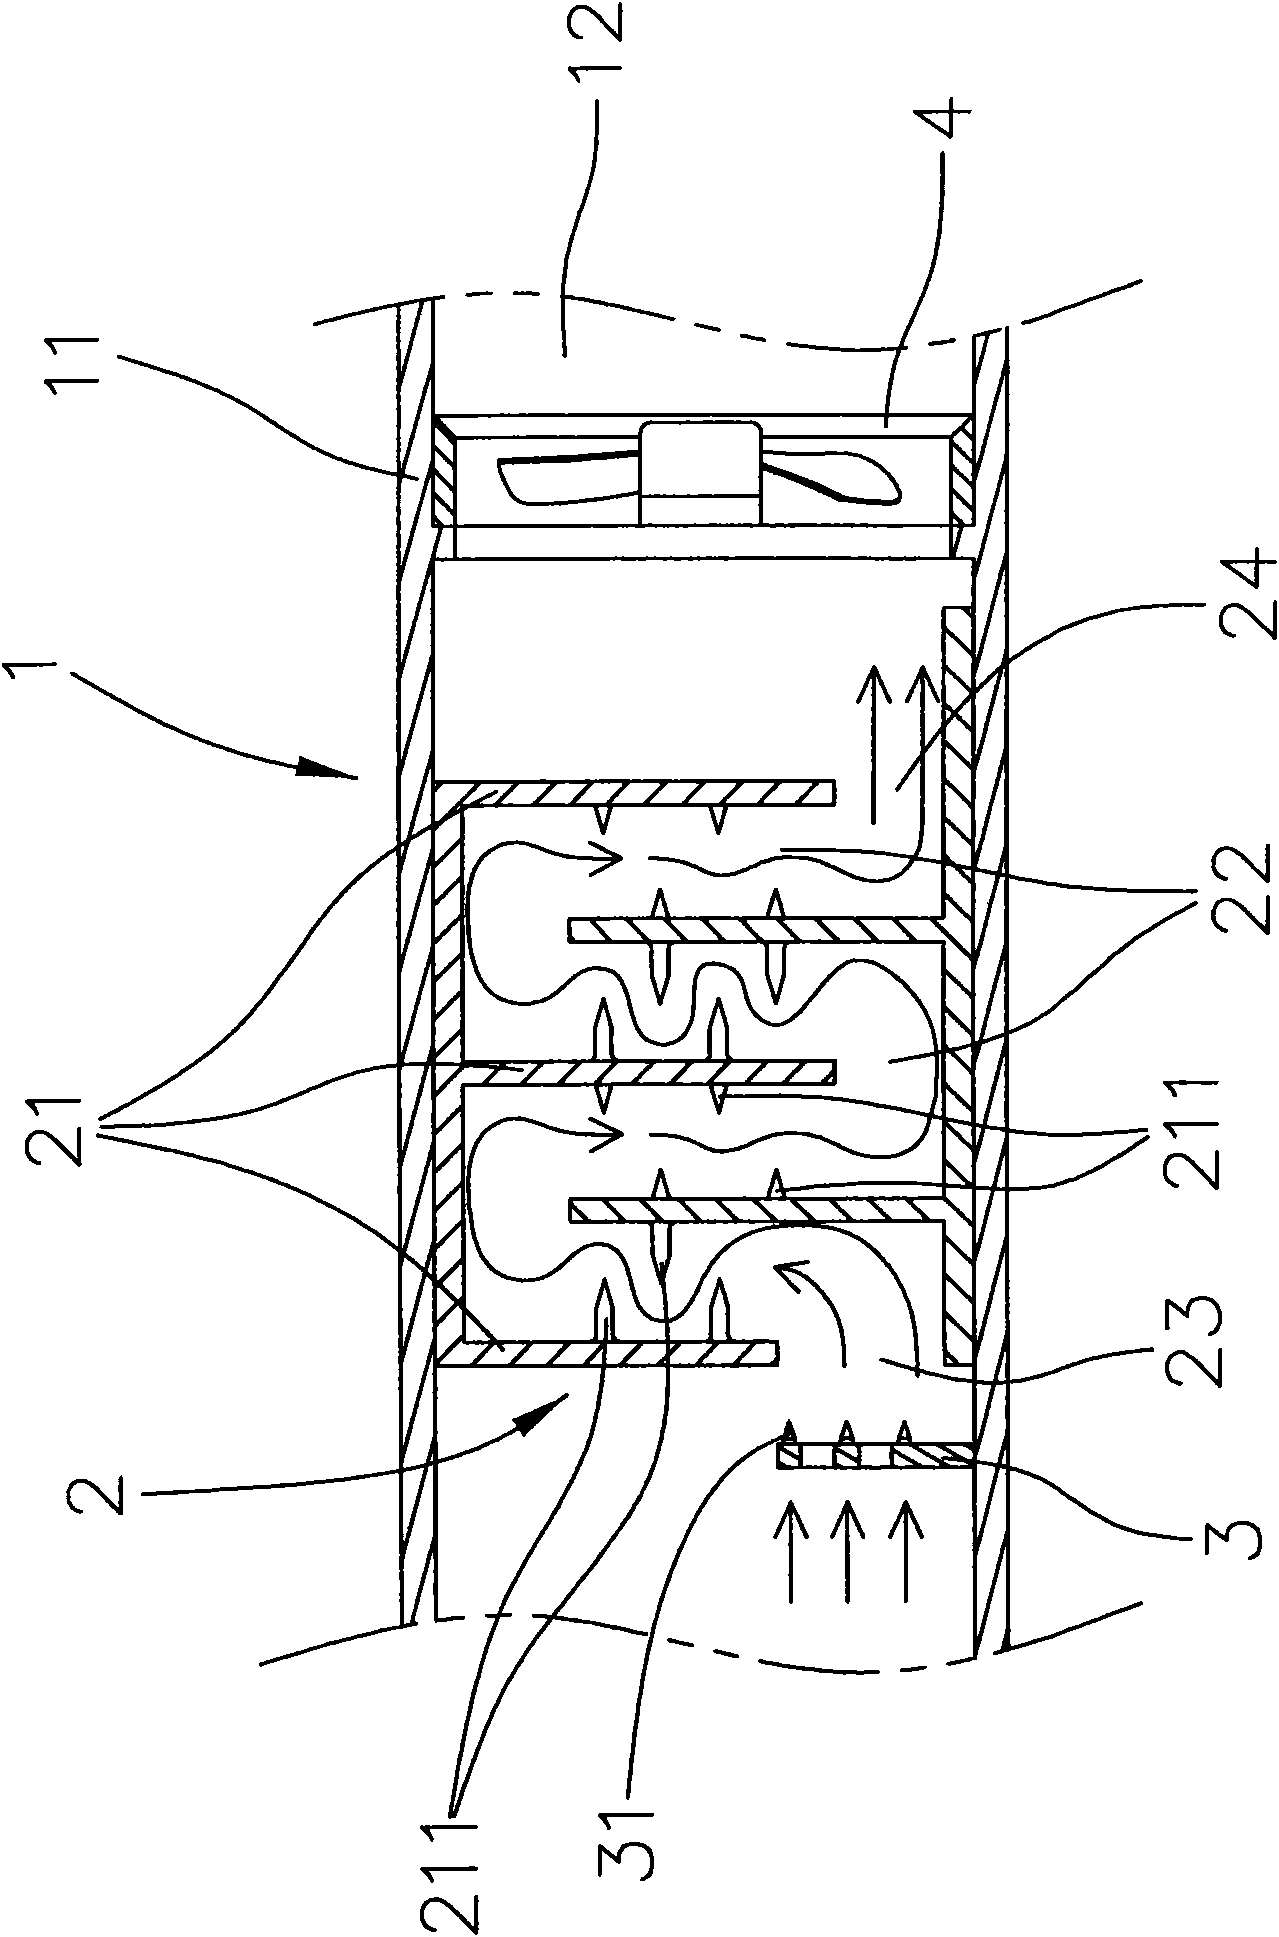 High-efficiency labyrinth type air treatment device